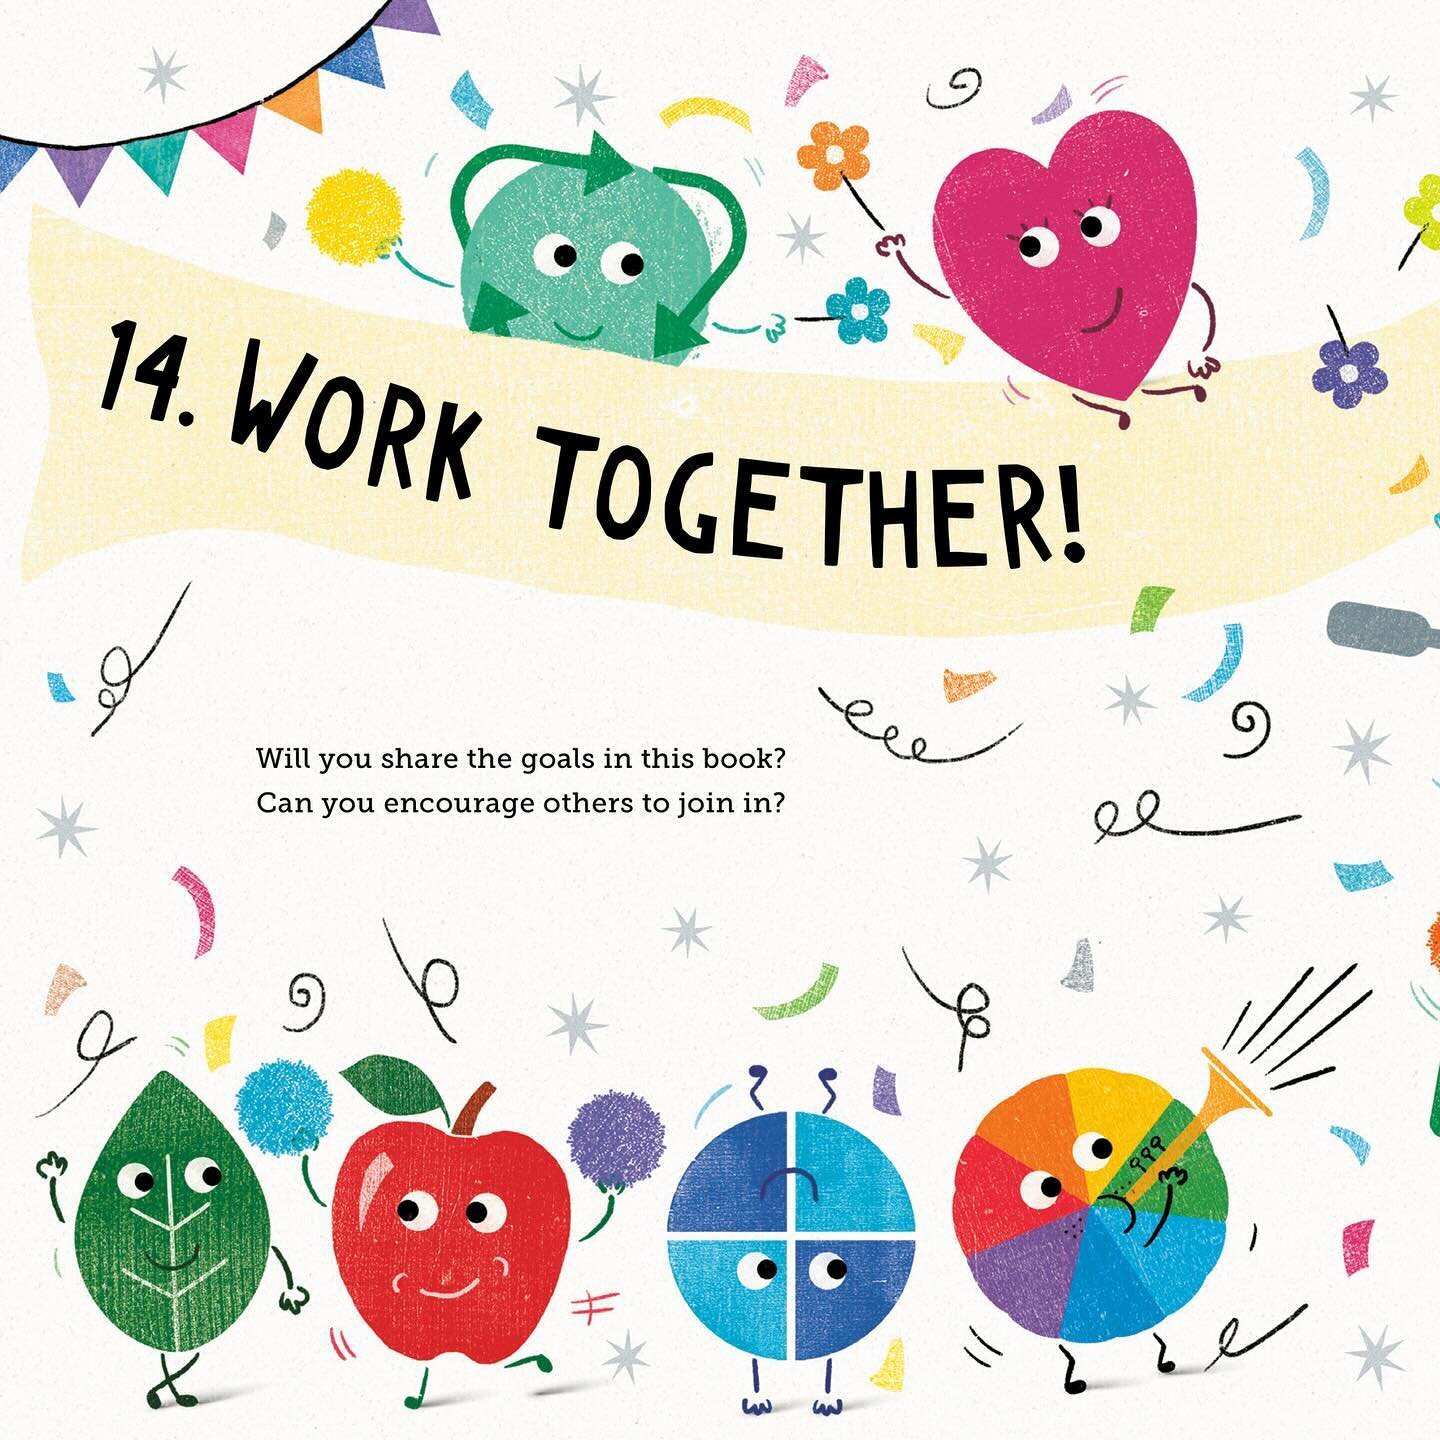 Together We Thrive 🙌

On this #WorldPartyDay (who knew?!) we thought we&rsquo;d share our celebratory final spread from James&rsquo; new book &lsquo;Small Steps, Big Change&rsquo; 🎉

The book is all about how through working together we can enjoy t